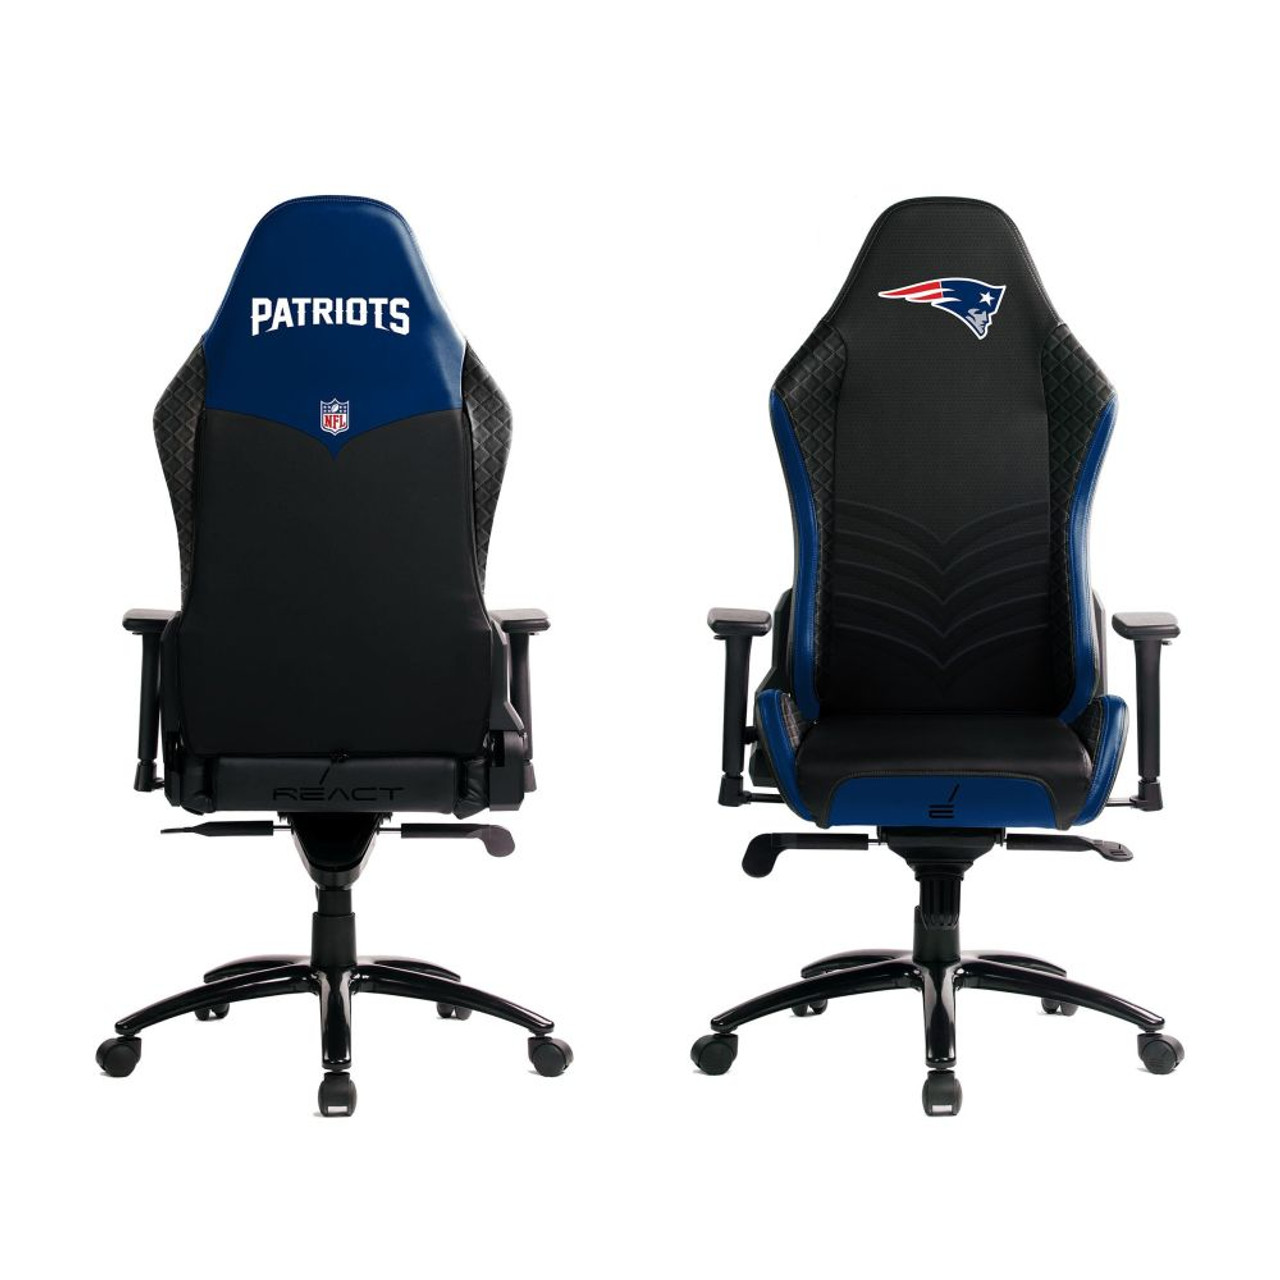 620-1010, NE, New England, Pats, Patriots, React, Pro Series, Gaming, Chair, NFL, Imperial